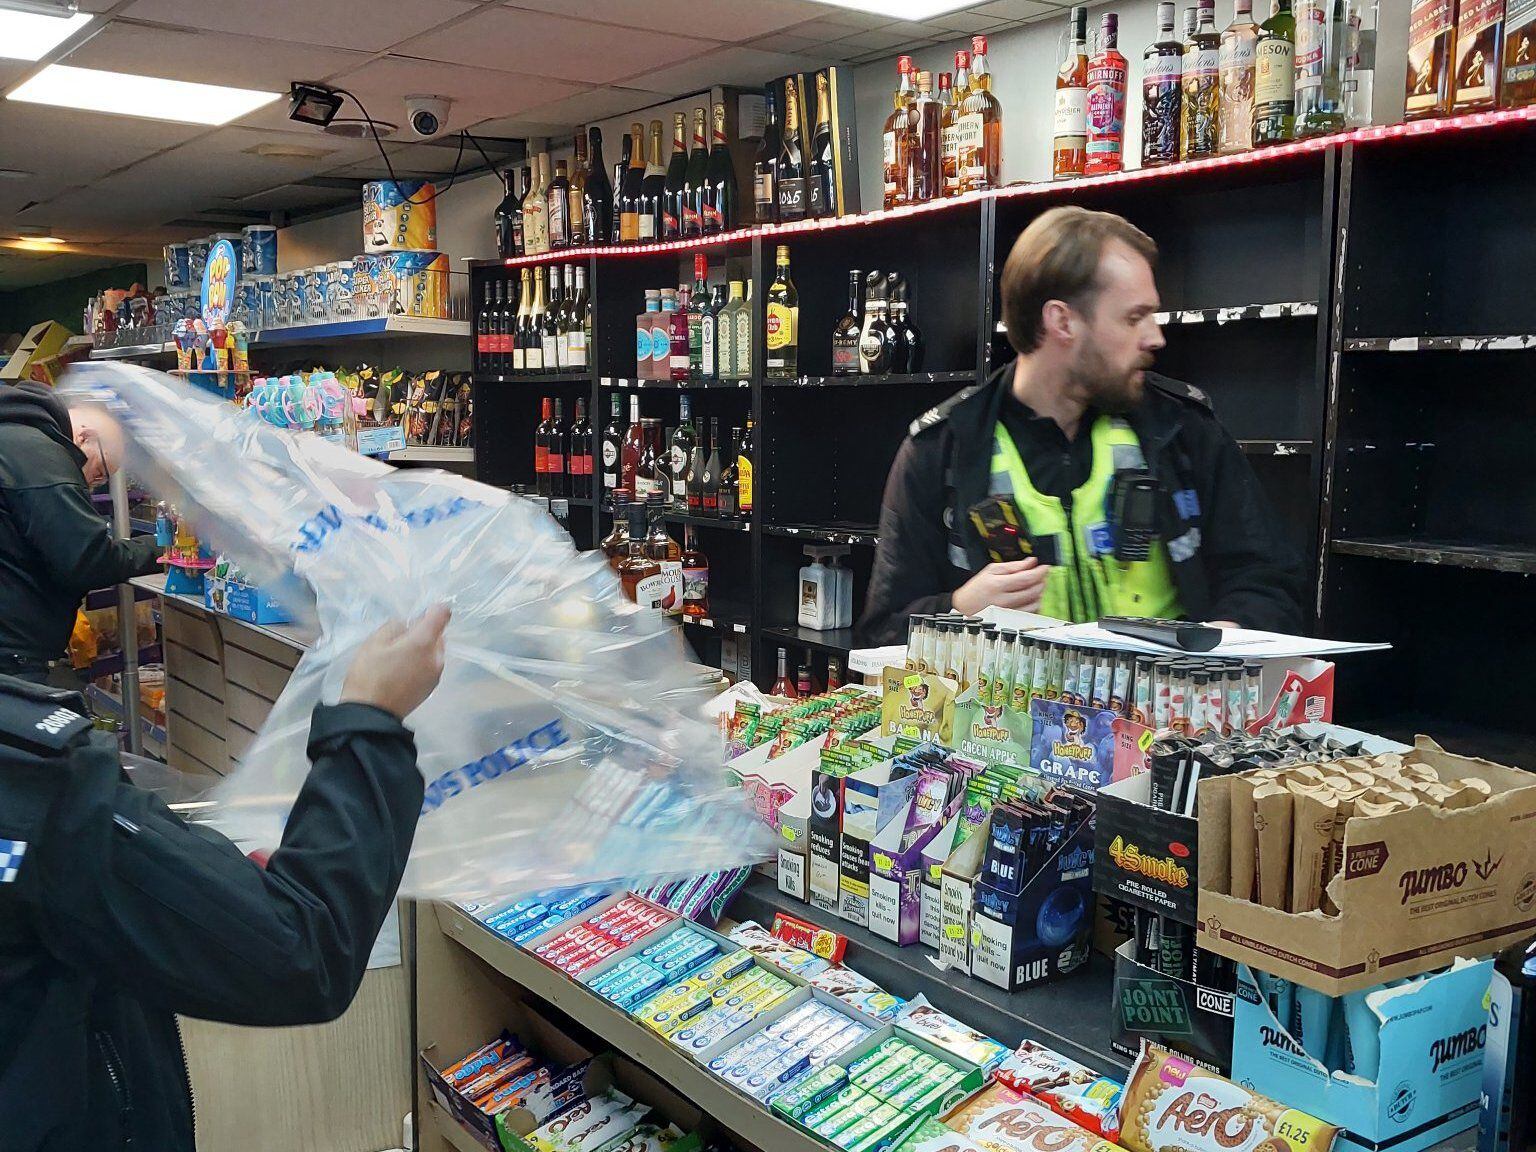 Police and trading standards empty shop's shelves of booze after licence warnings